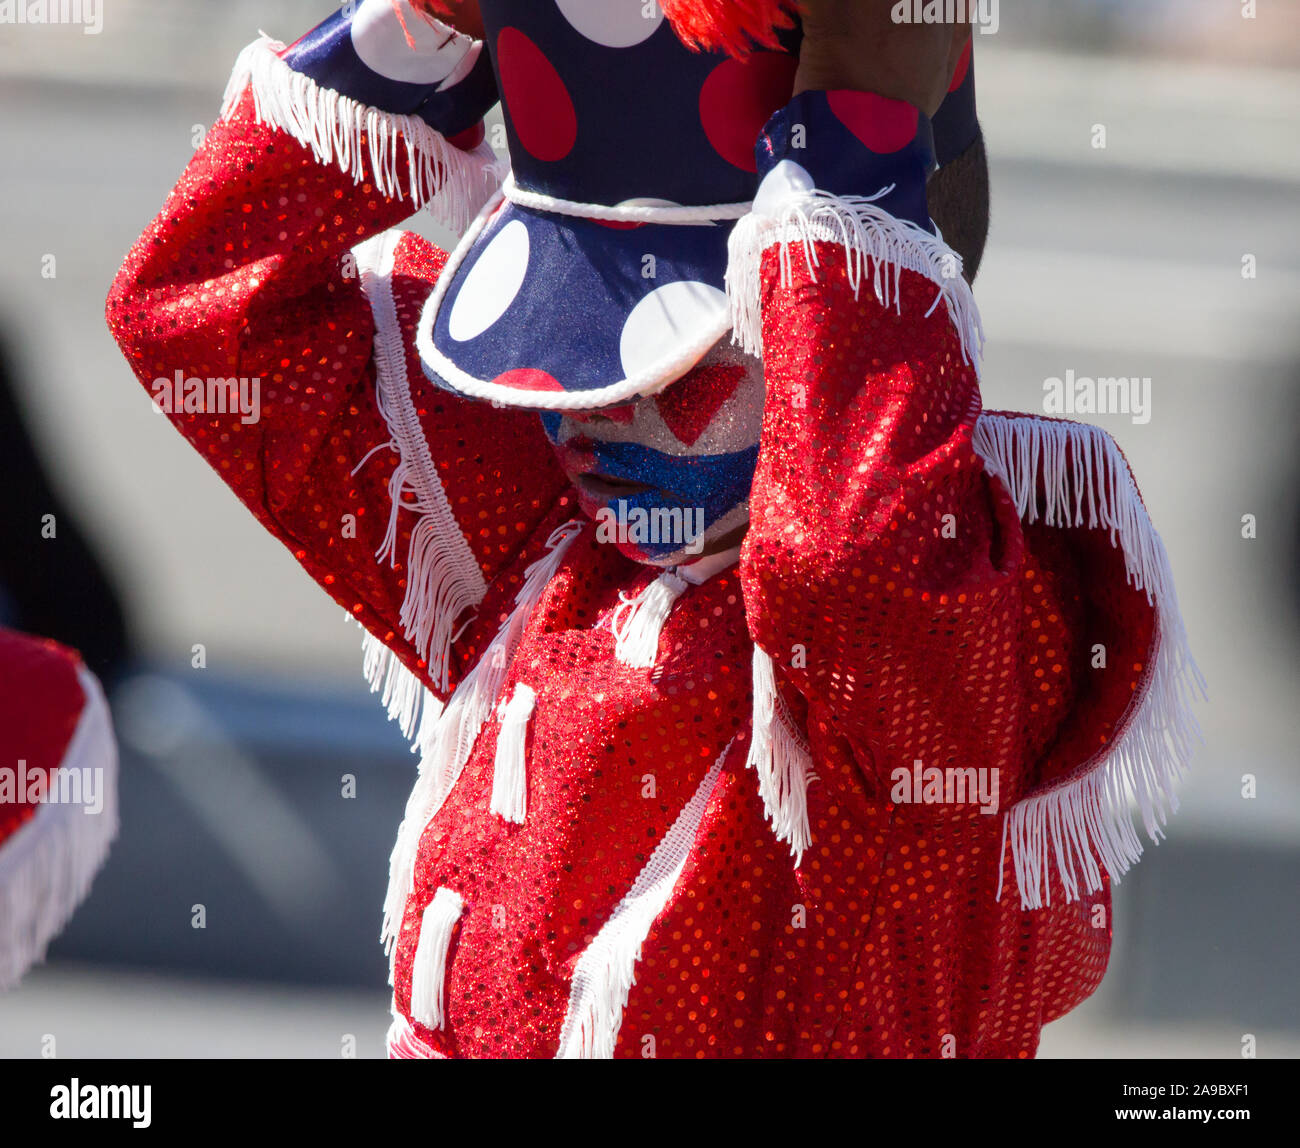 small child, young boy, kid, youngster wearing sparkly red sequinned jacket and epaulettes adjusting a polka dot hat in a carnival parade on New Year Stock Photo